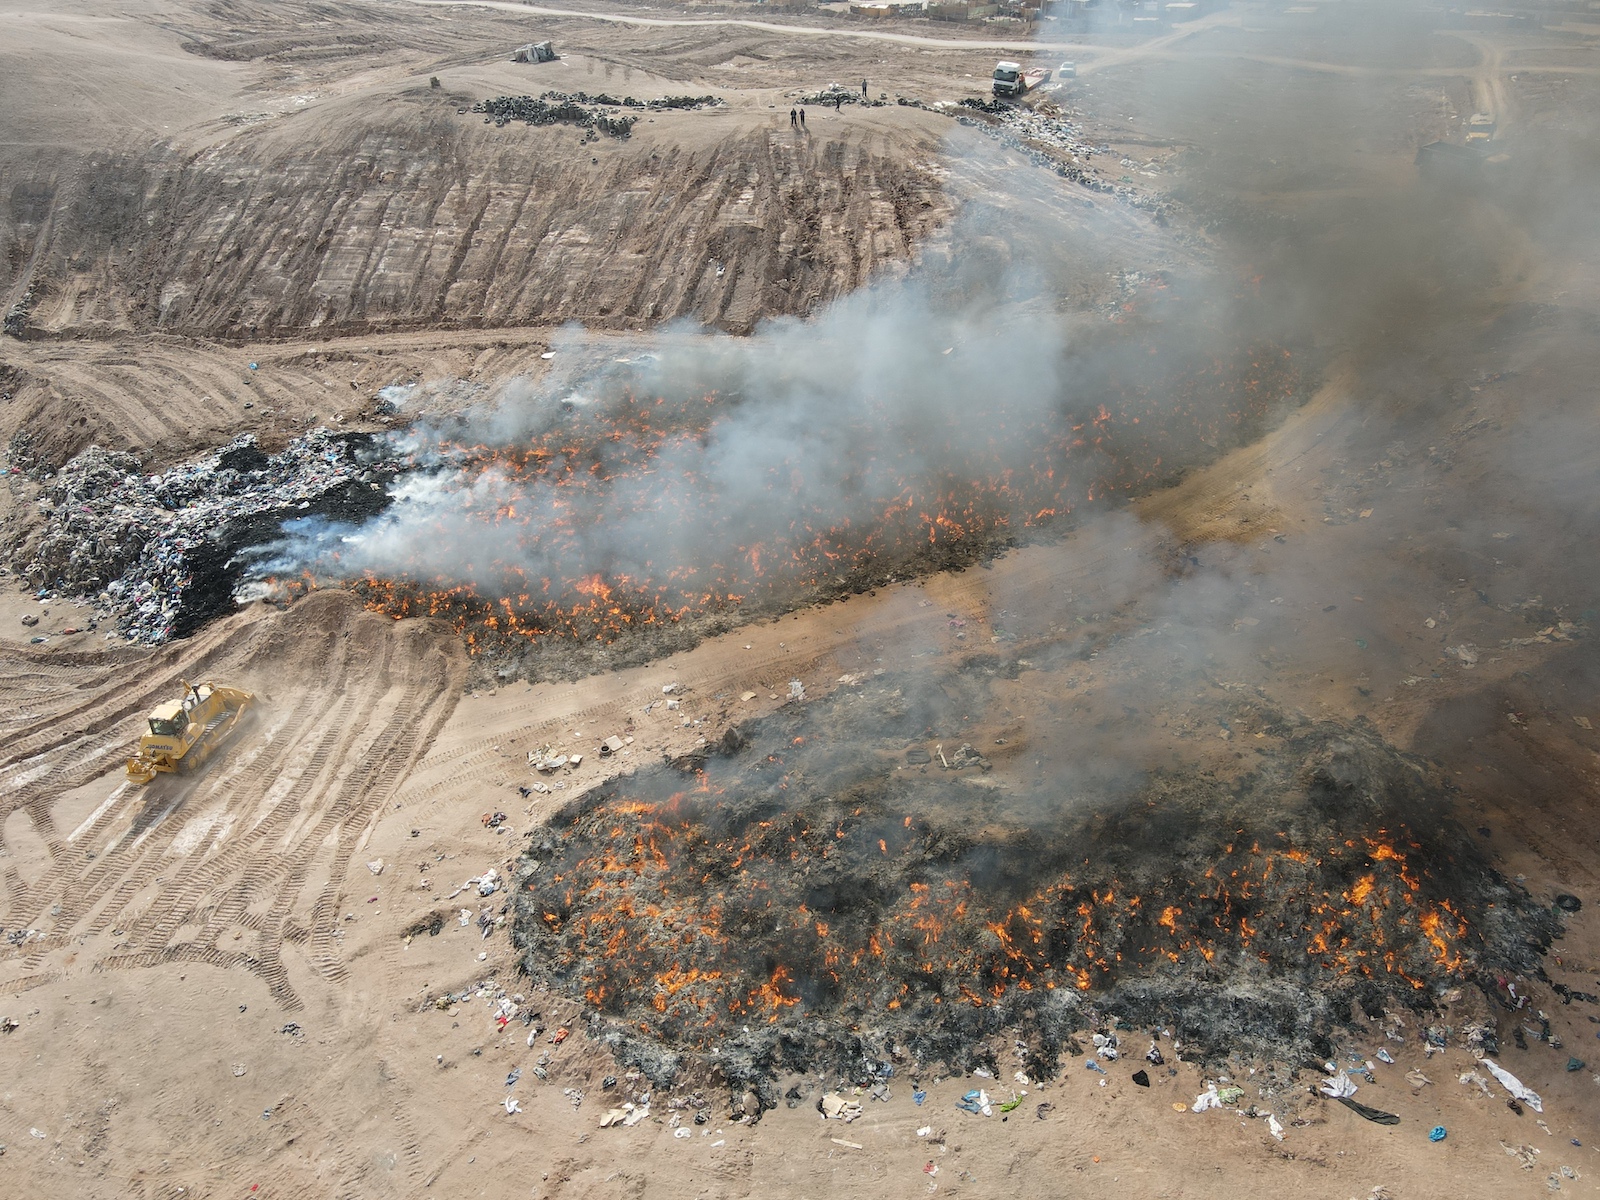 Smoke plumes from burning piles of clothing in sand dunes